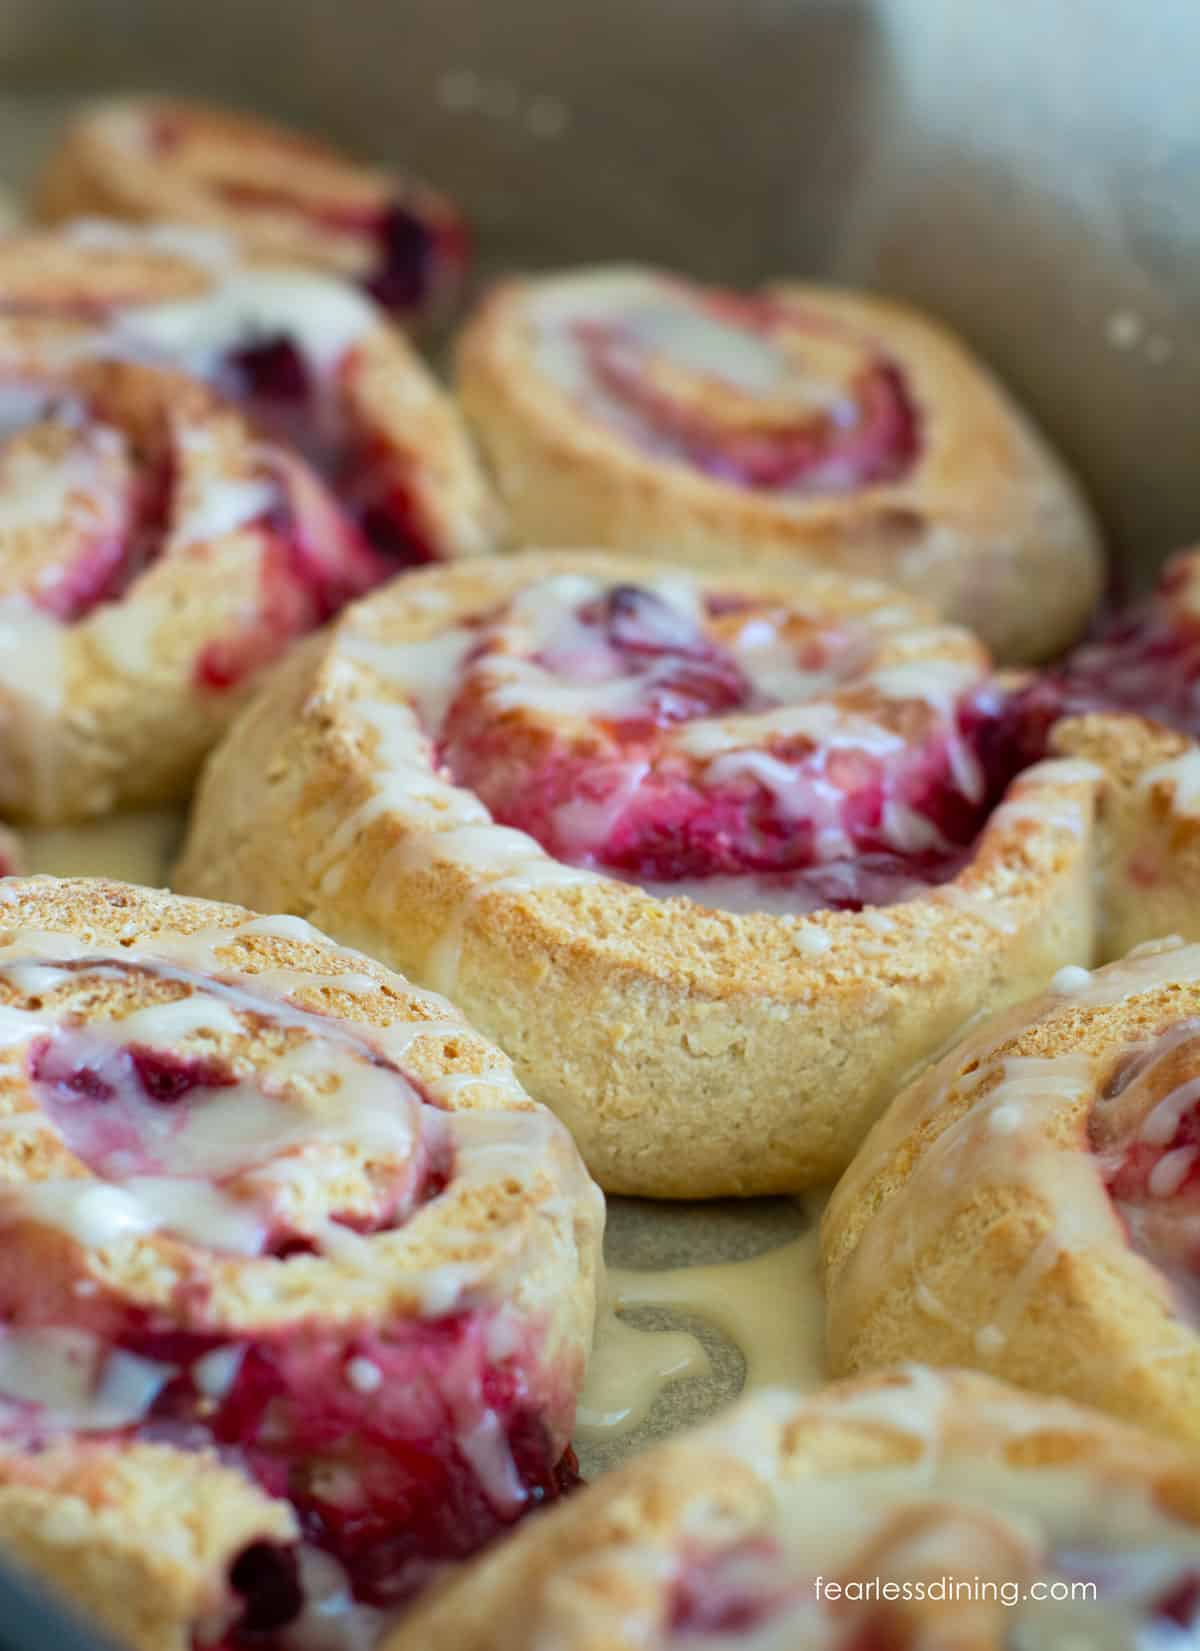 A close up of the baked gluten free cranberry rolls topped with glaze.